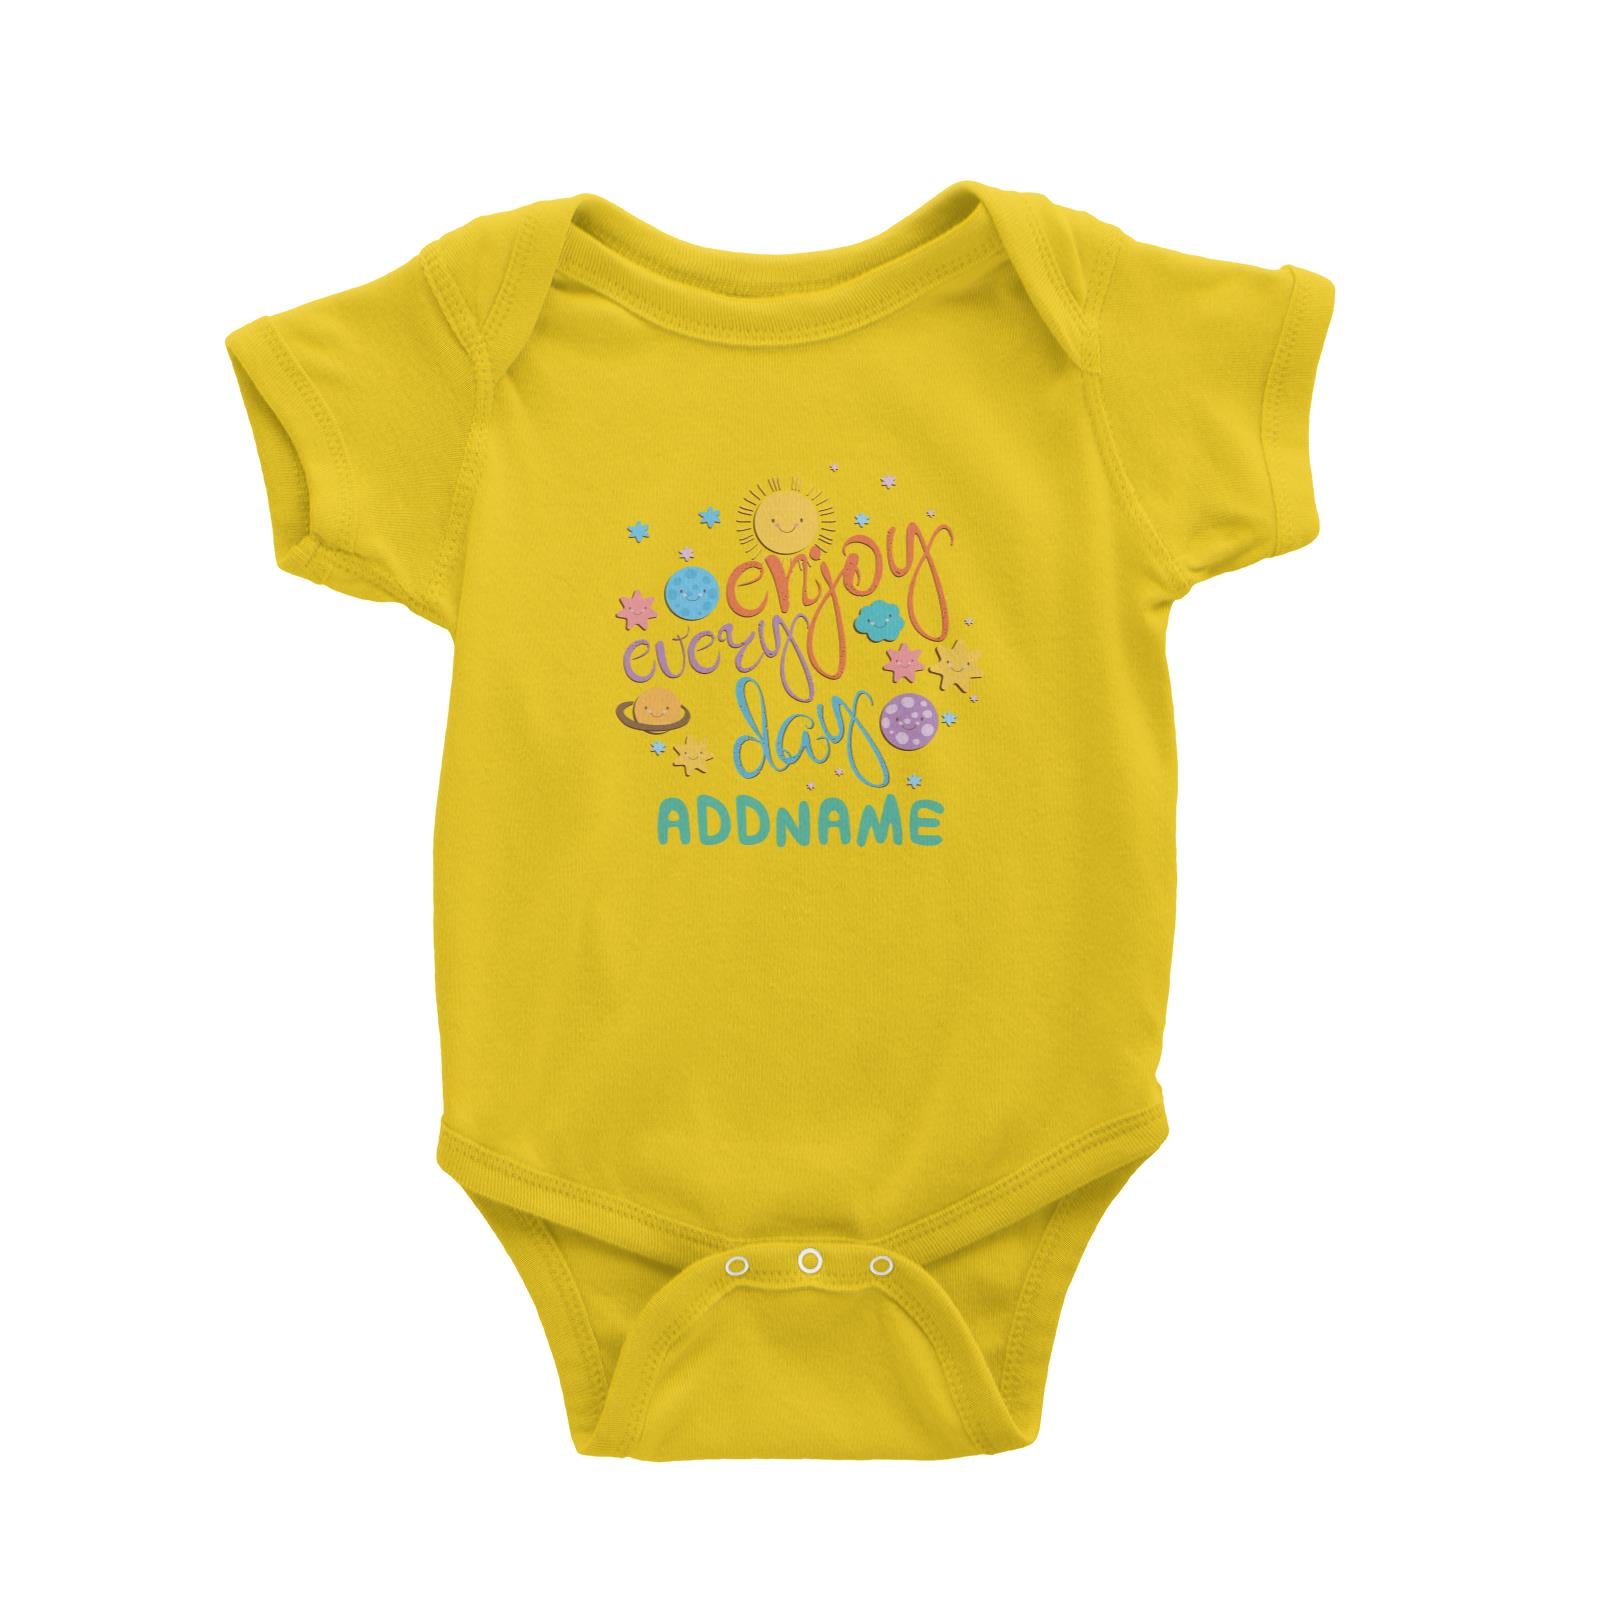 Children's Day Gift Series Enjoy Every Day Space Addname Baby Romper